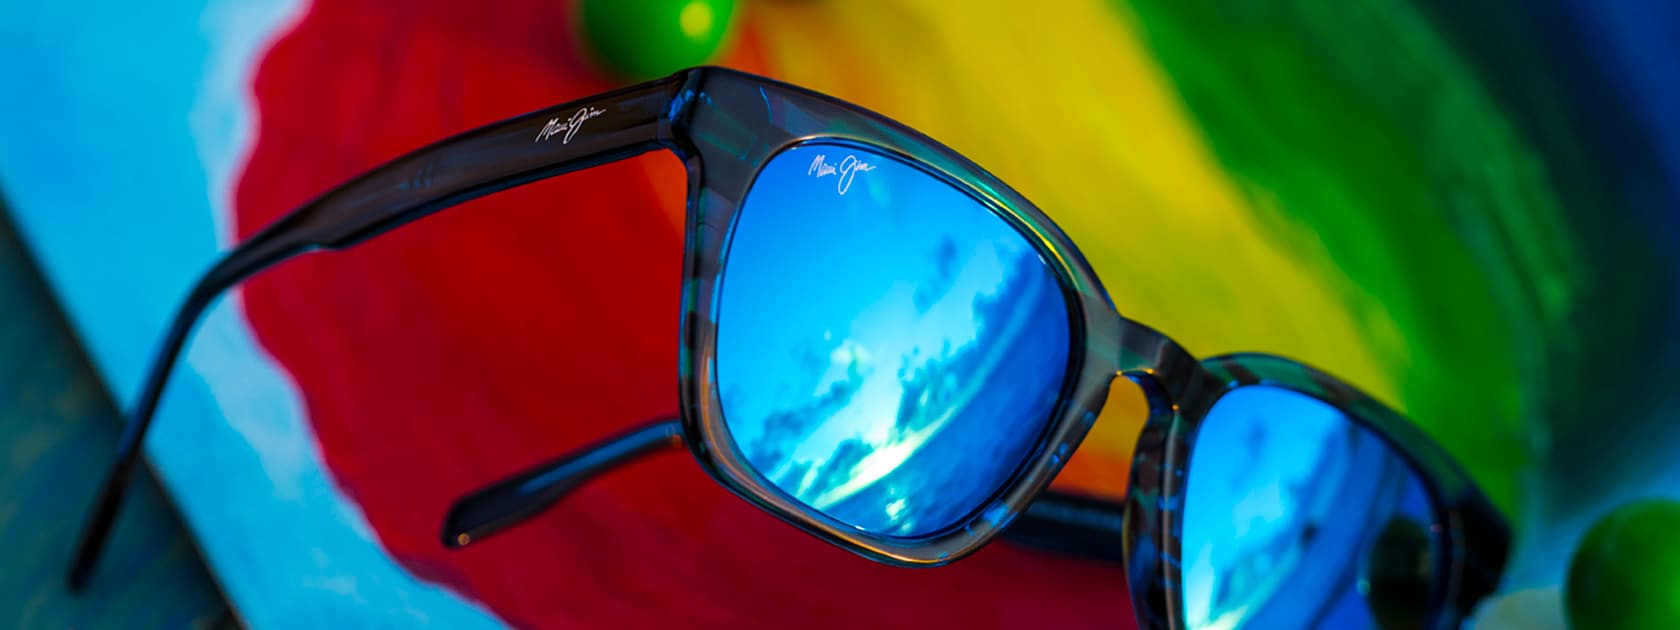 blue frame sunglasses with blue lens in front of colorful background